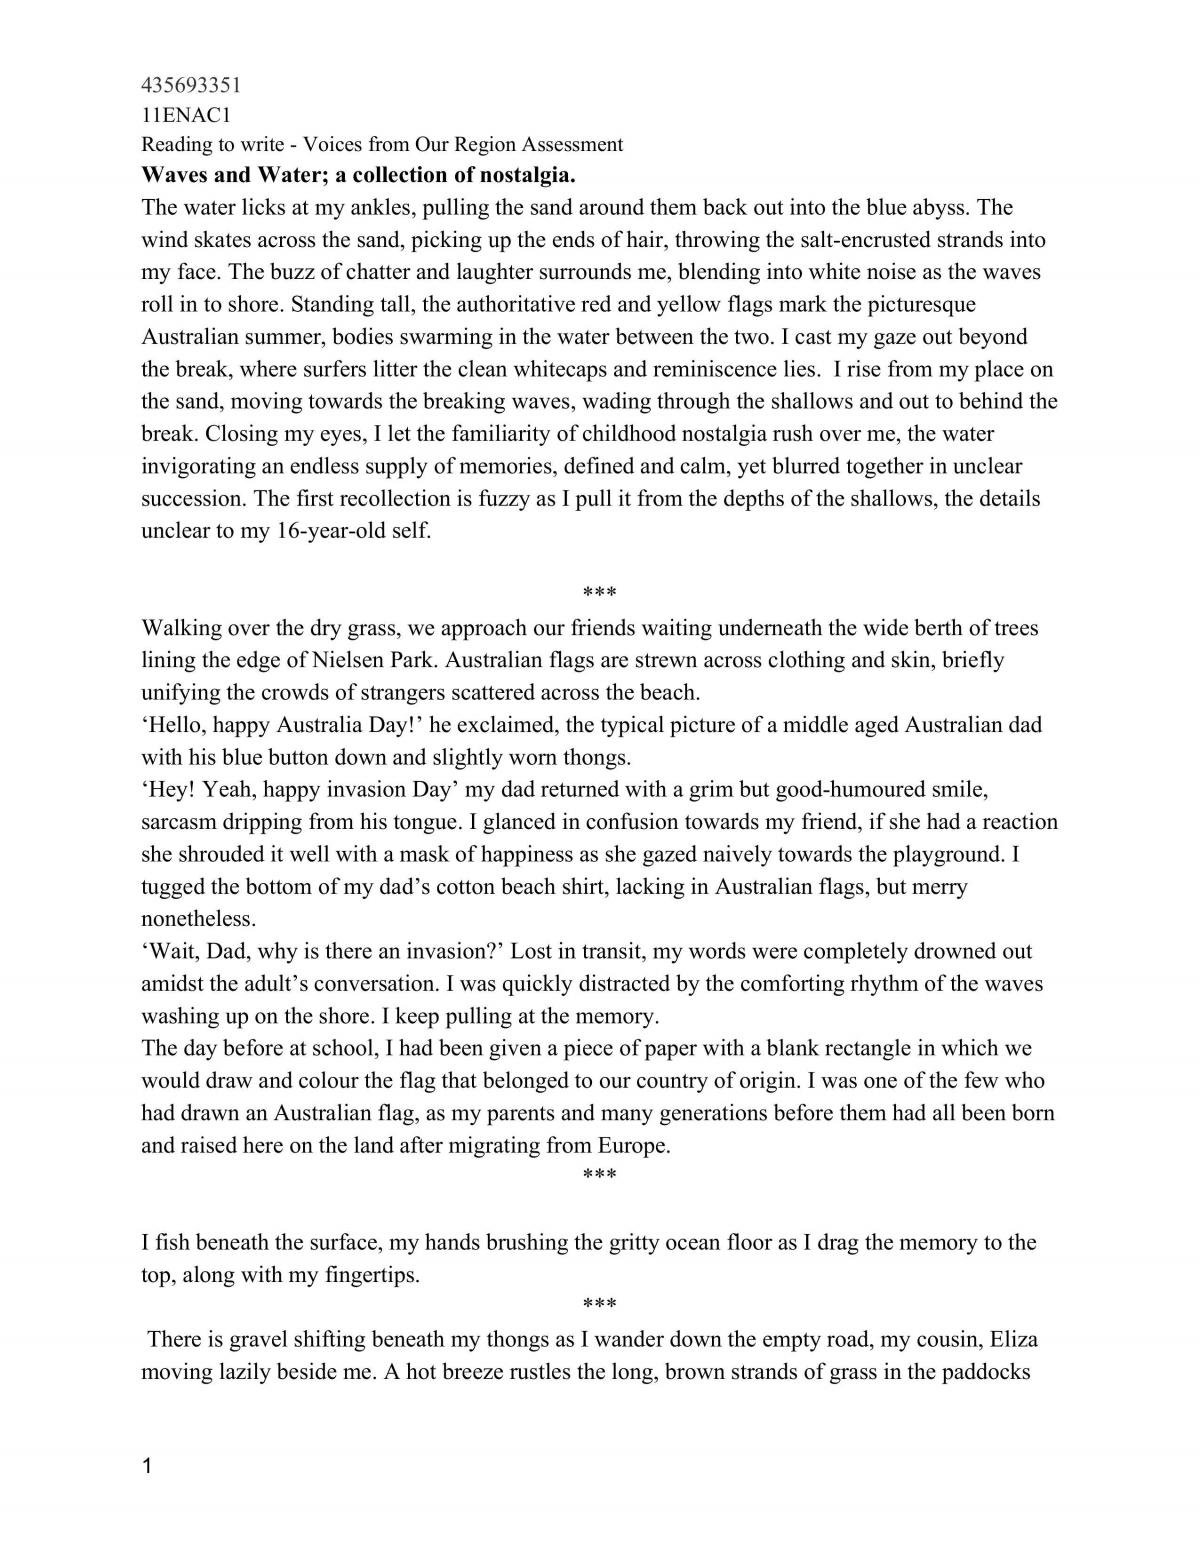 Voices From our region module/short story assignment: waves and water; a collection of nostagia - Page 1